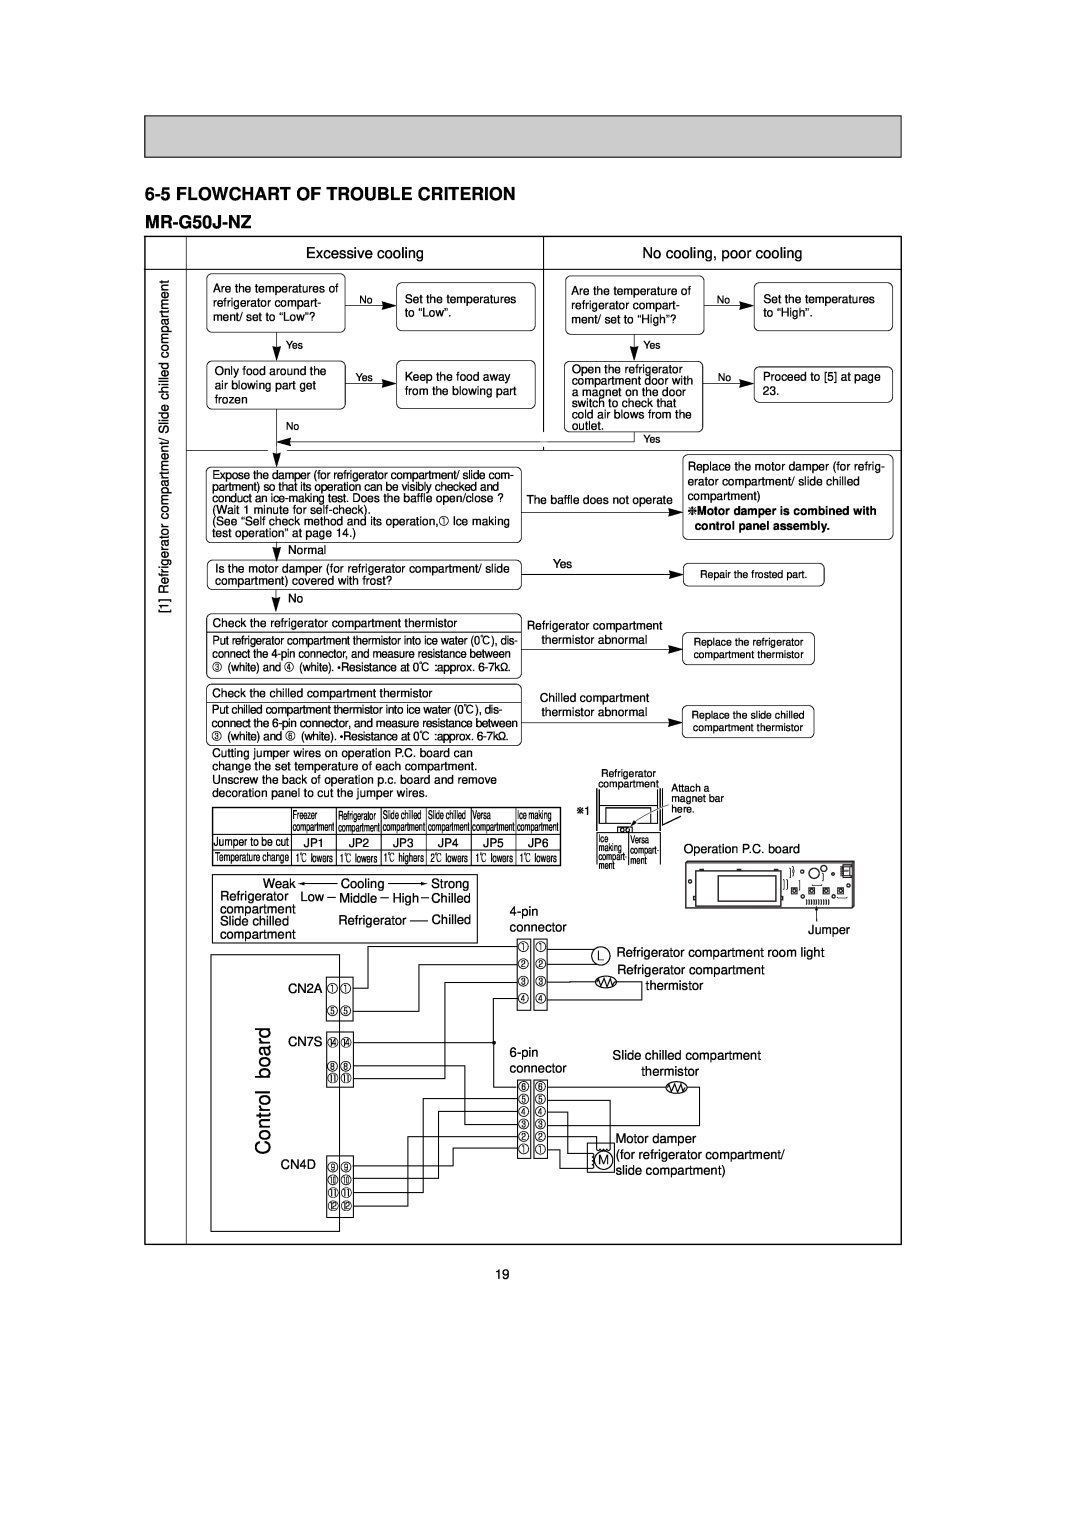 Mitsubishi Electronics MR-G50J-SS-NZ manual FLOWCHART OF TROUBLE CRITERION MR-G50J-NZ, Excessive cooling, Control, board 